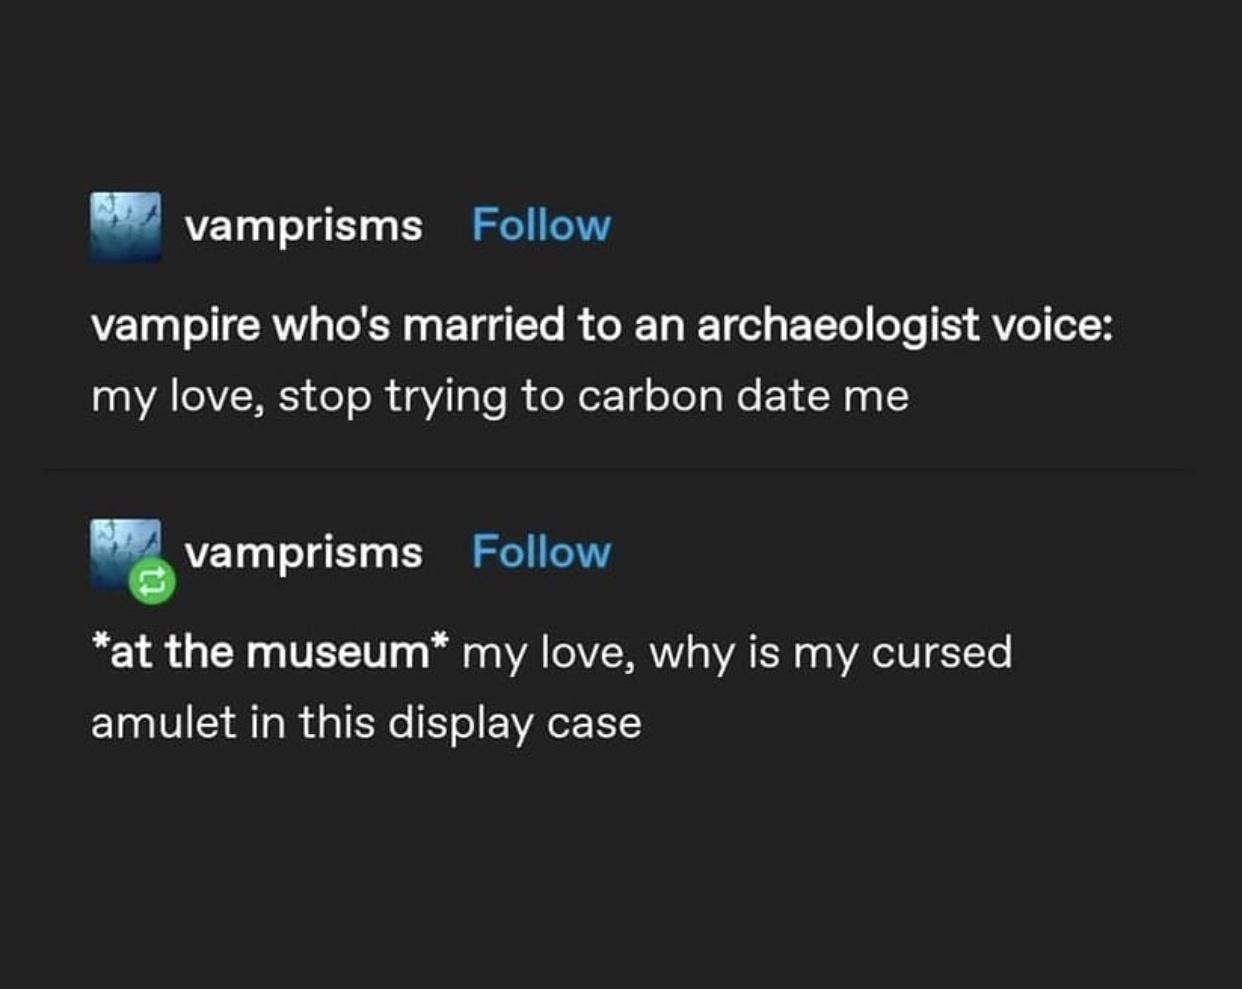 funny memes - dank memes - screenshot - vamprisms vampire who's married to an archaeologist voice my love, stop trying to carbon date me vamprisms at the museum my love, why is my cursed amulet in this display case